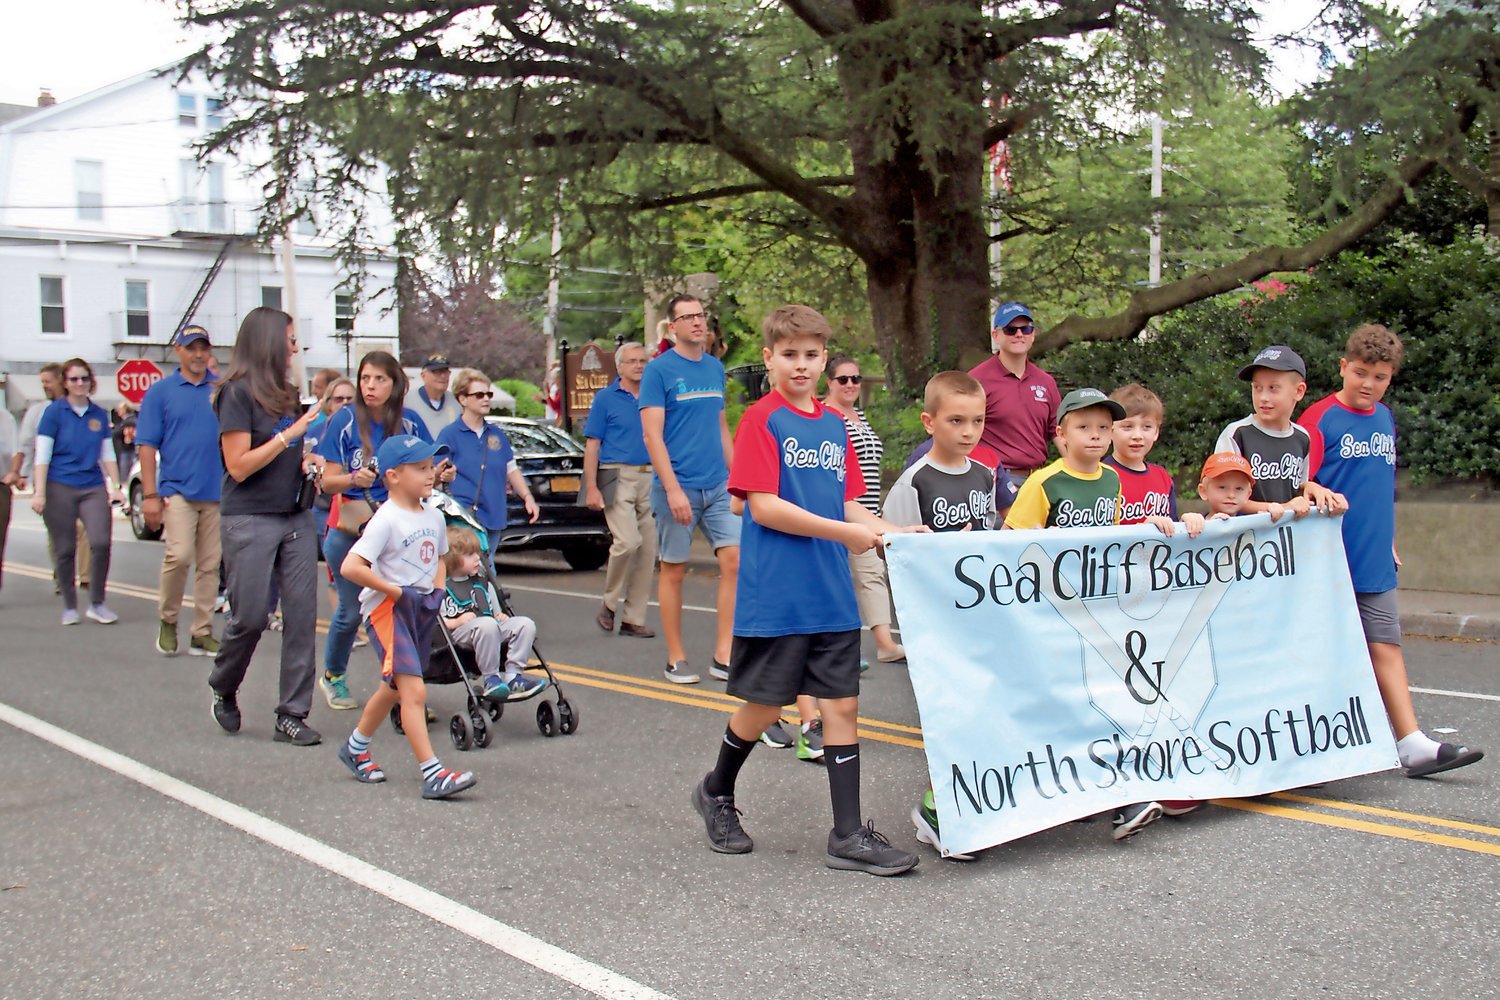 The Sea Cliff Baseball and North Shore Softball teams were among the marchers.